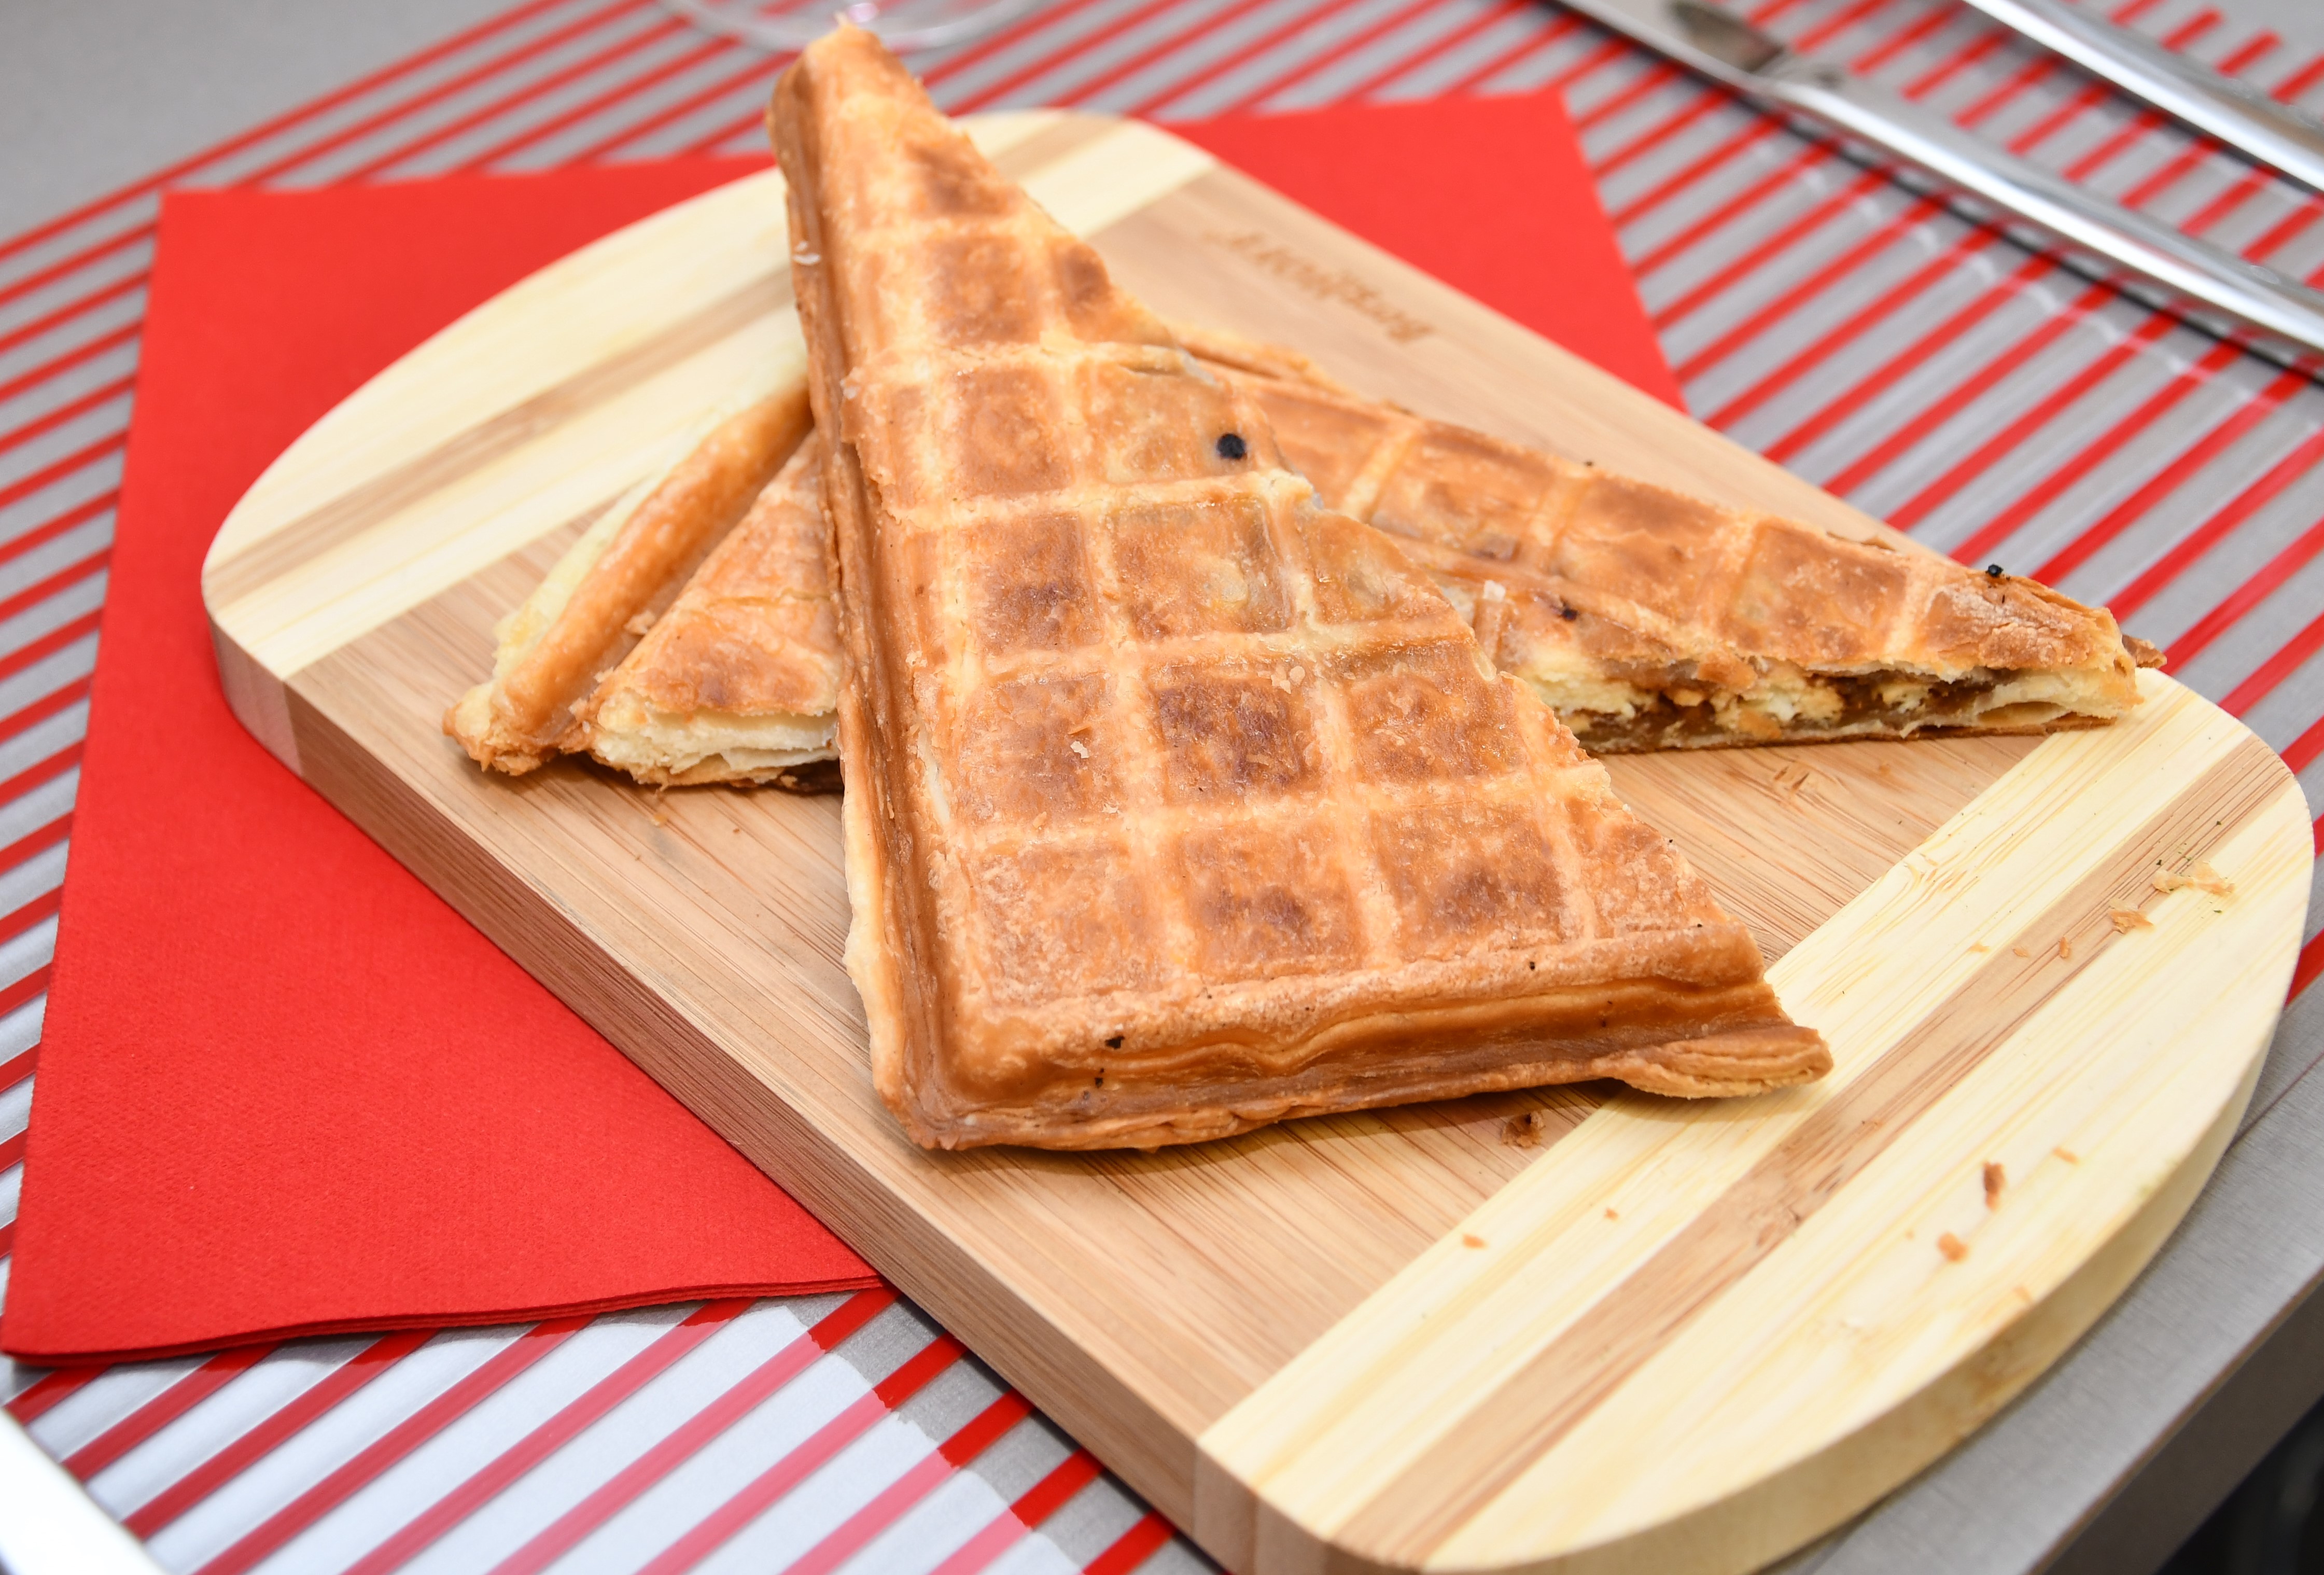 Savory waffle filled with goat cheese, bacon and honey